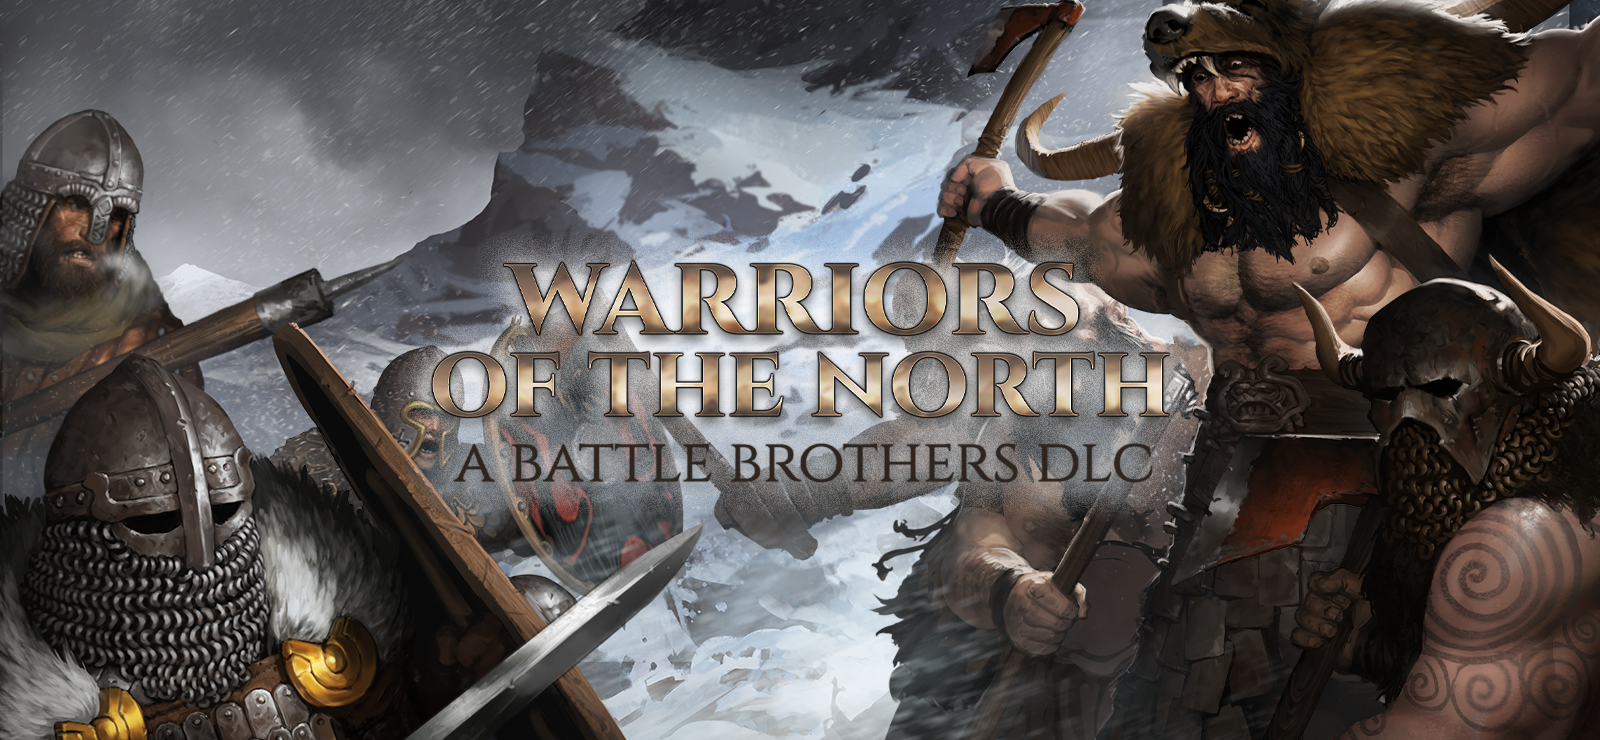 Battle Brothers - Warriors Of The North